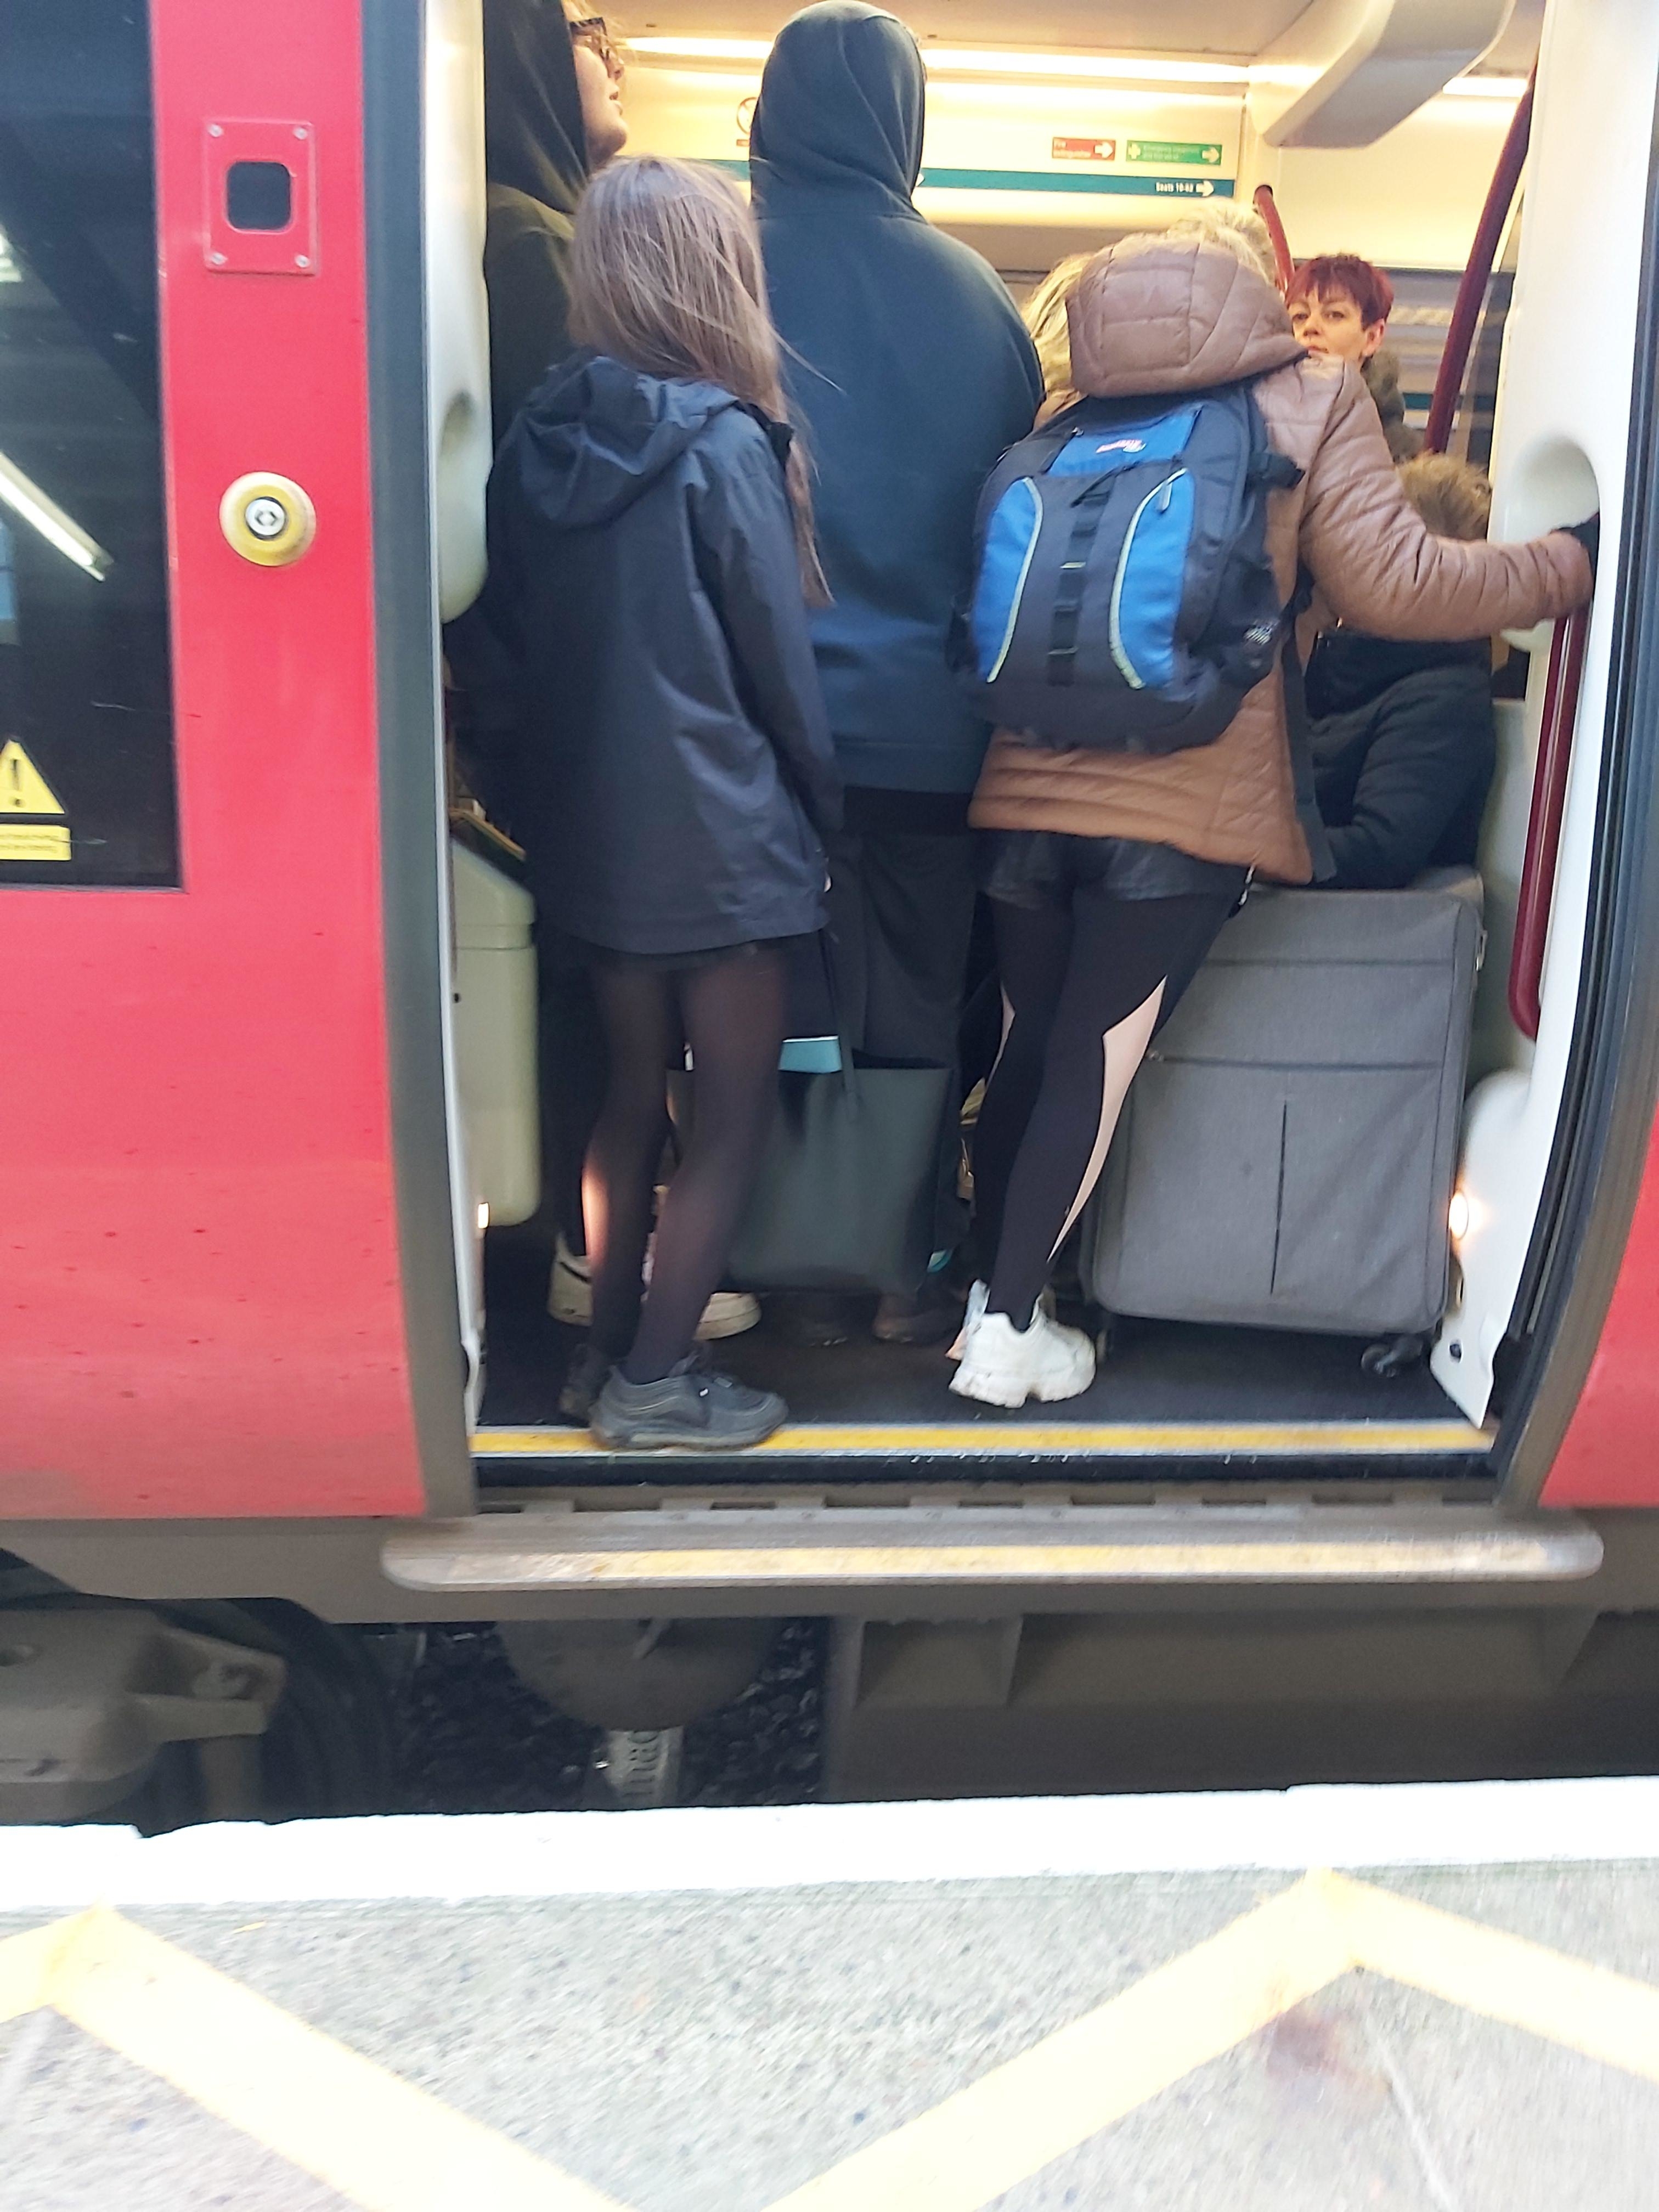 Open door showing a packed train so no other passengers can get on